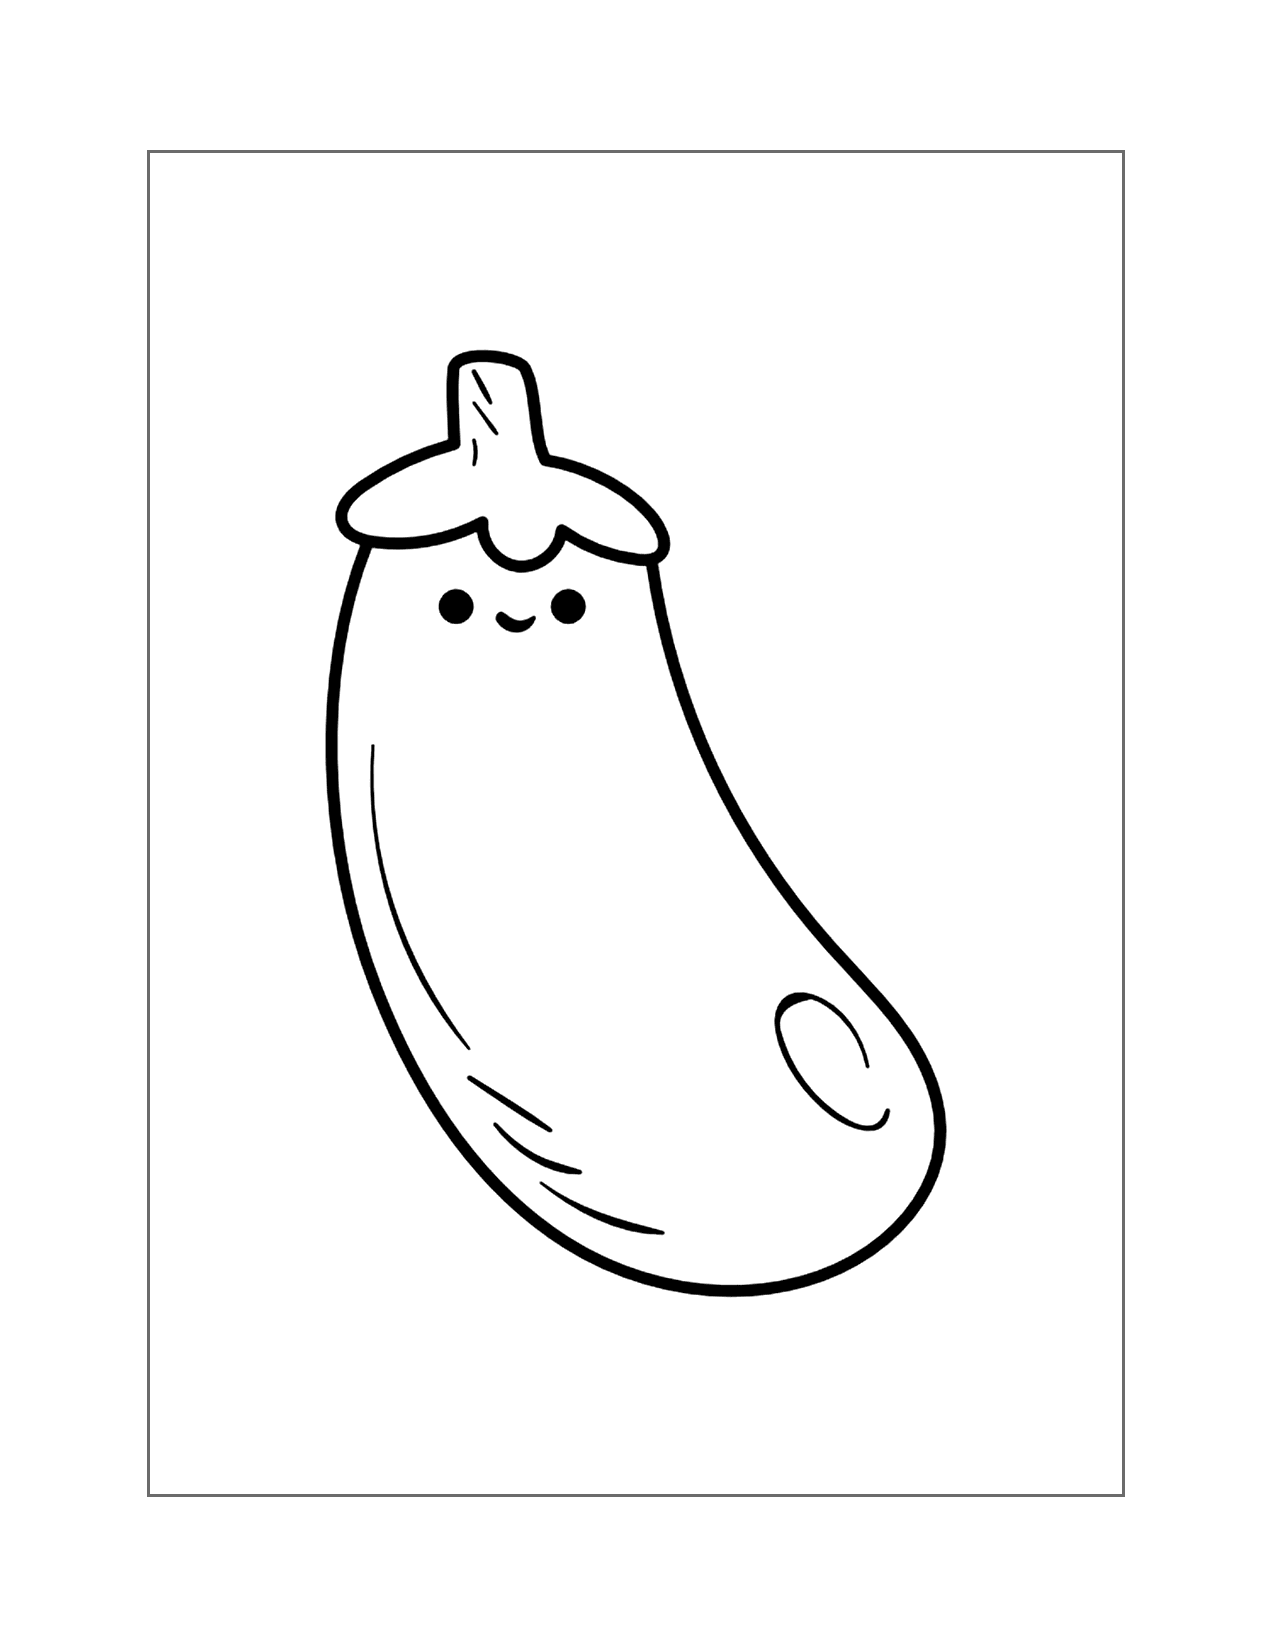 Cute Eggplant Coloring Page